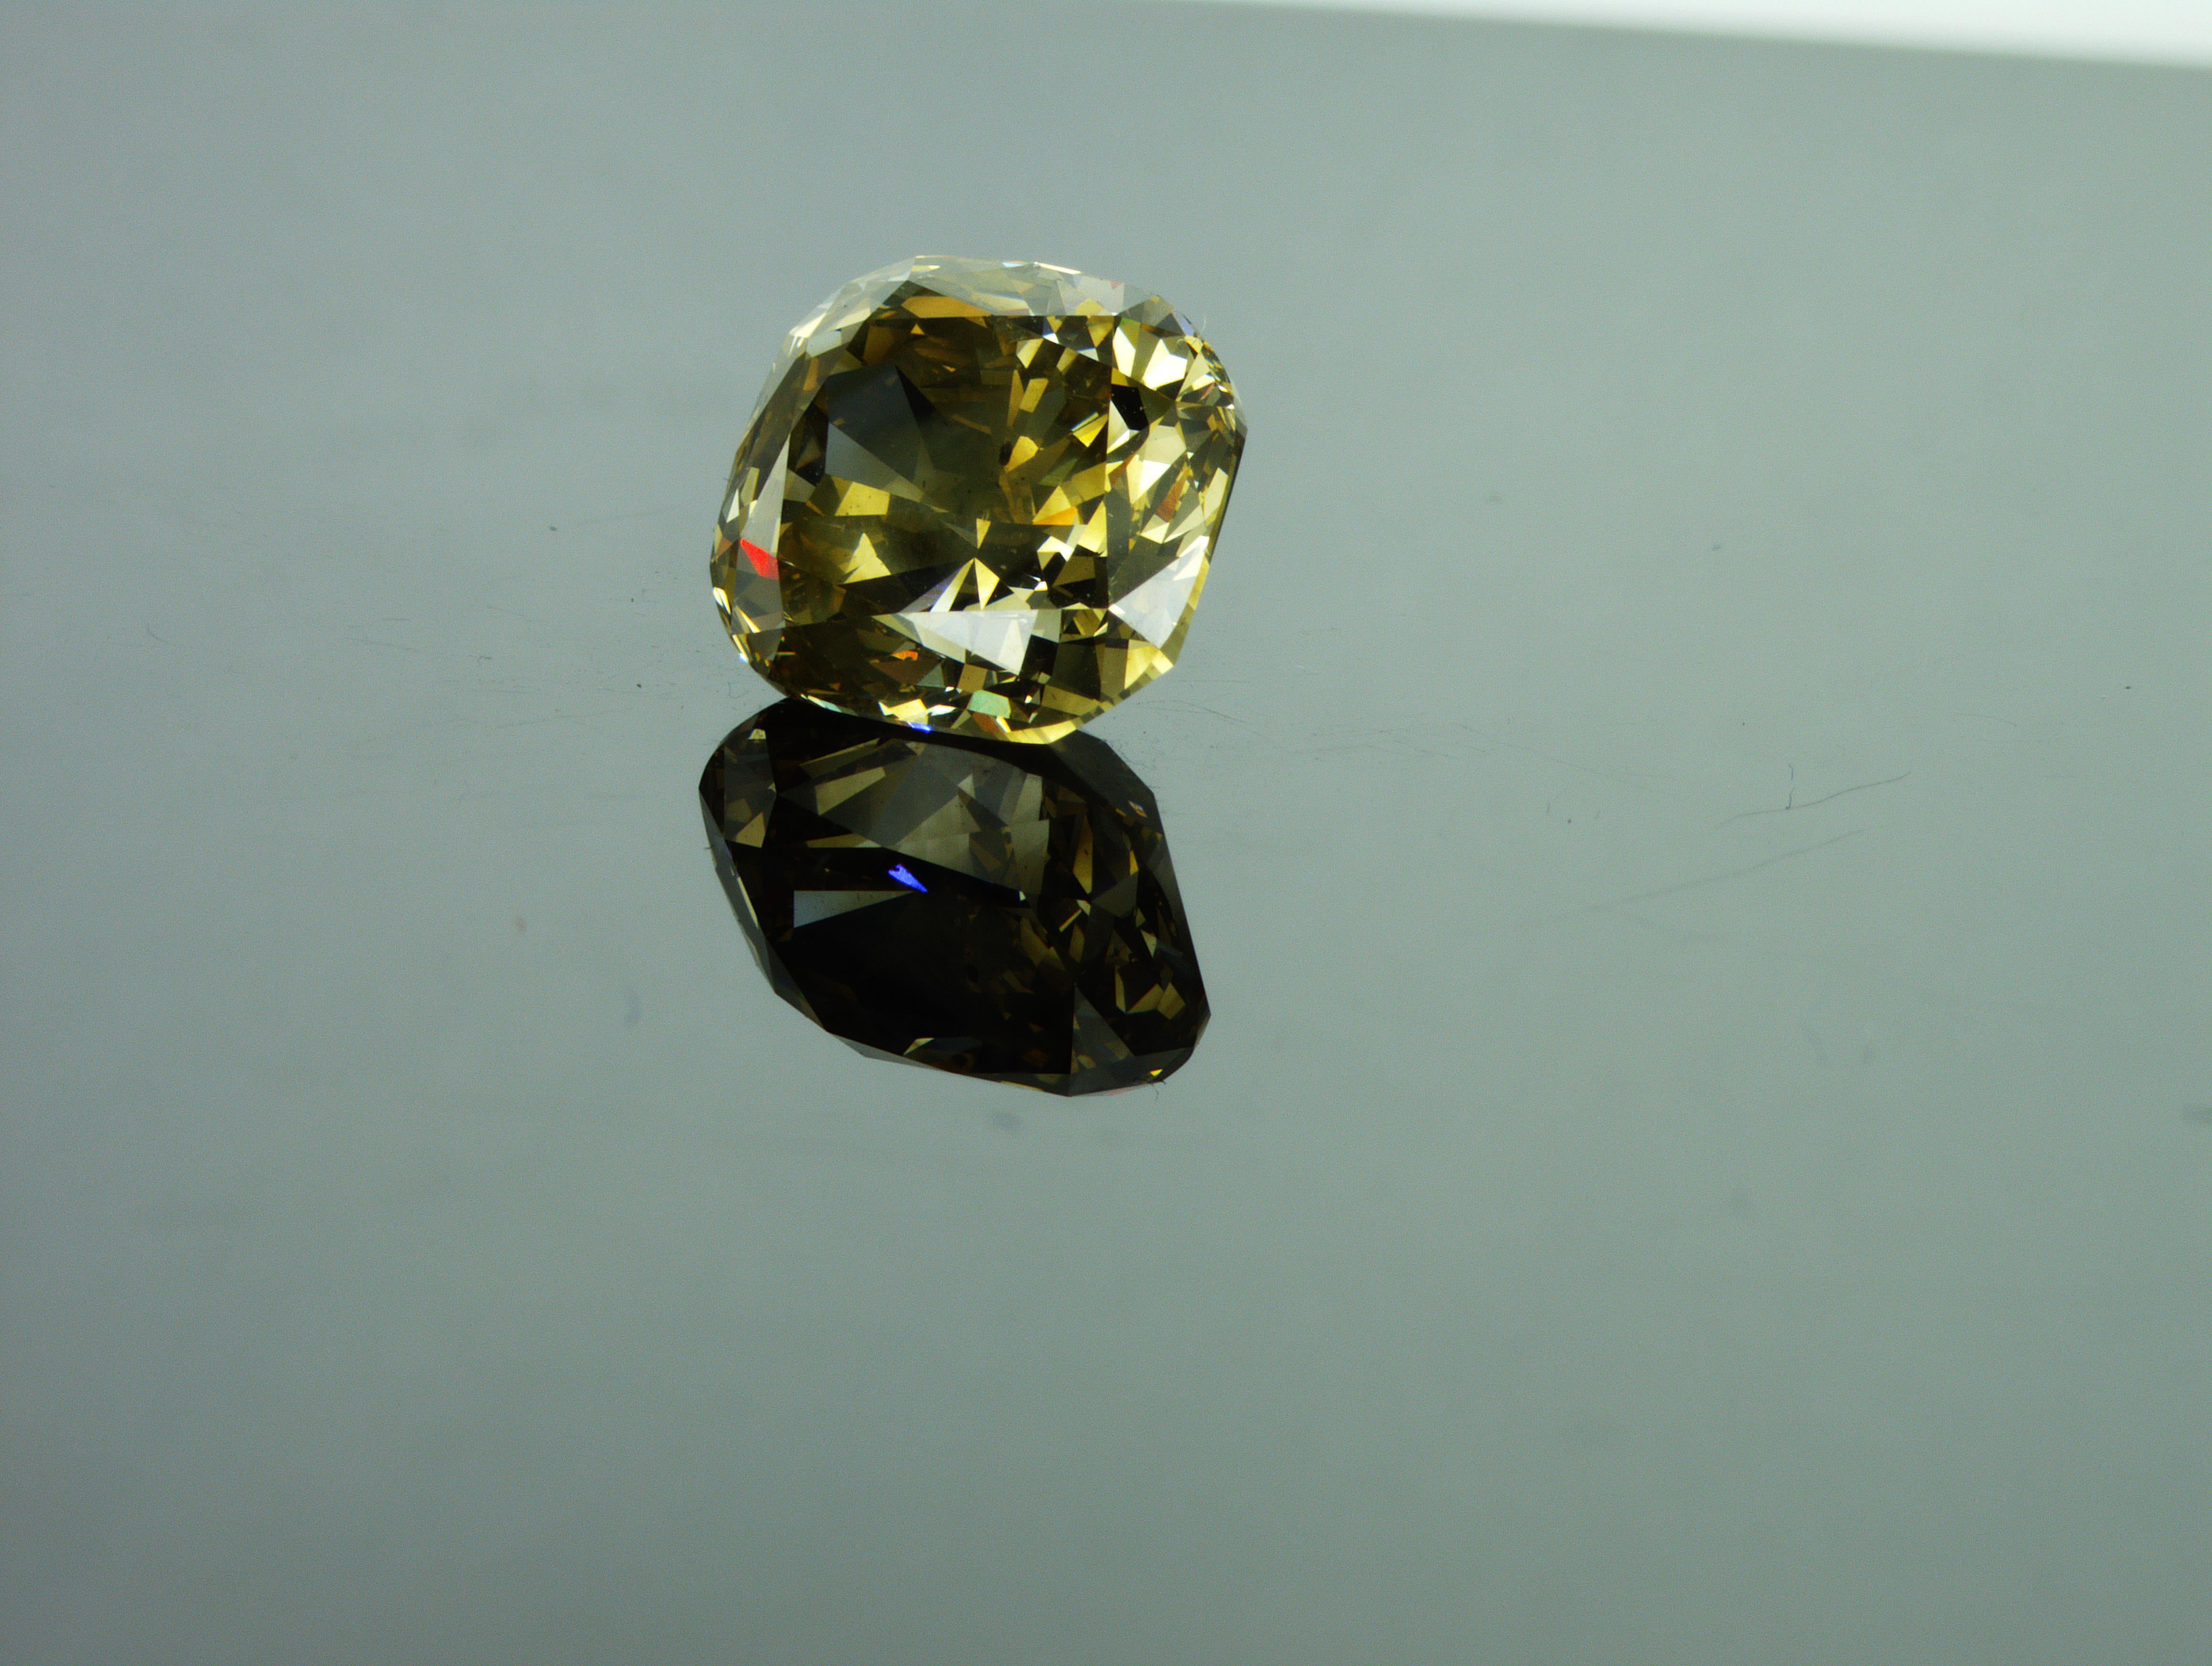 We are natural diamond production company located in Dubai.
Weight: 7.02ct
Shape: Cushion
Color: Brown-Yellow
Intensity: Fancy
Clarity: I1
Polish: Excellent
Symm: Good